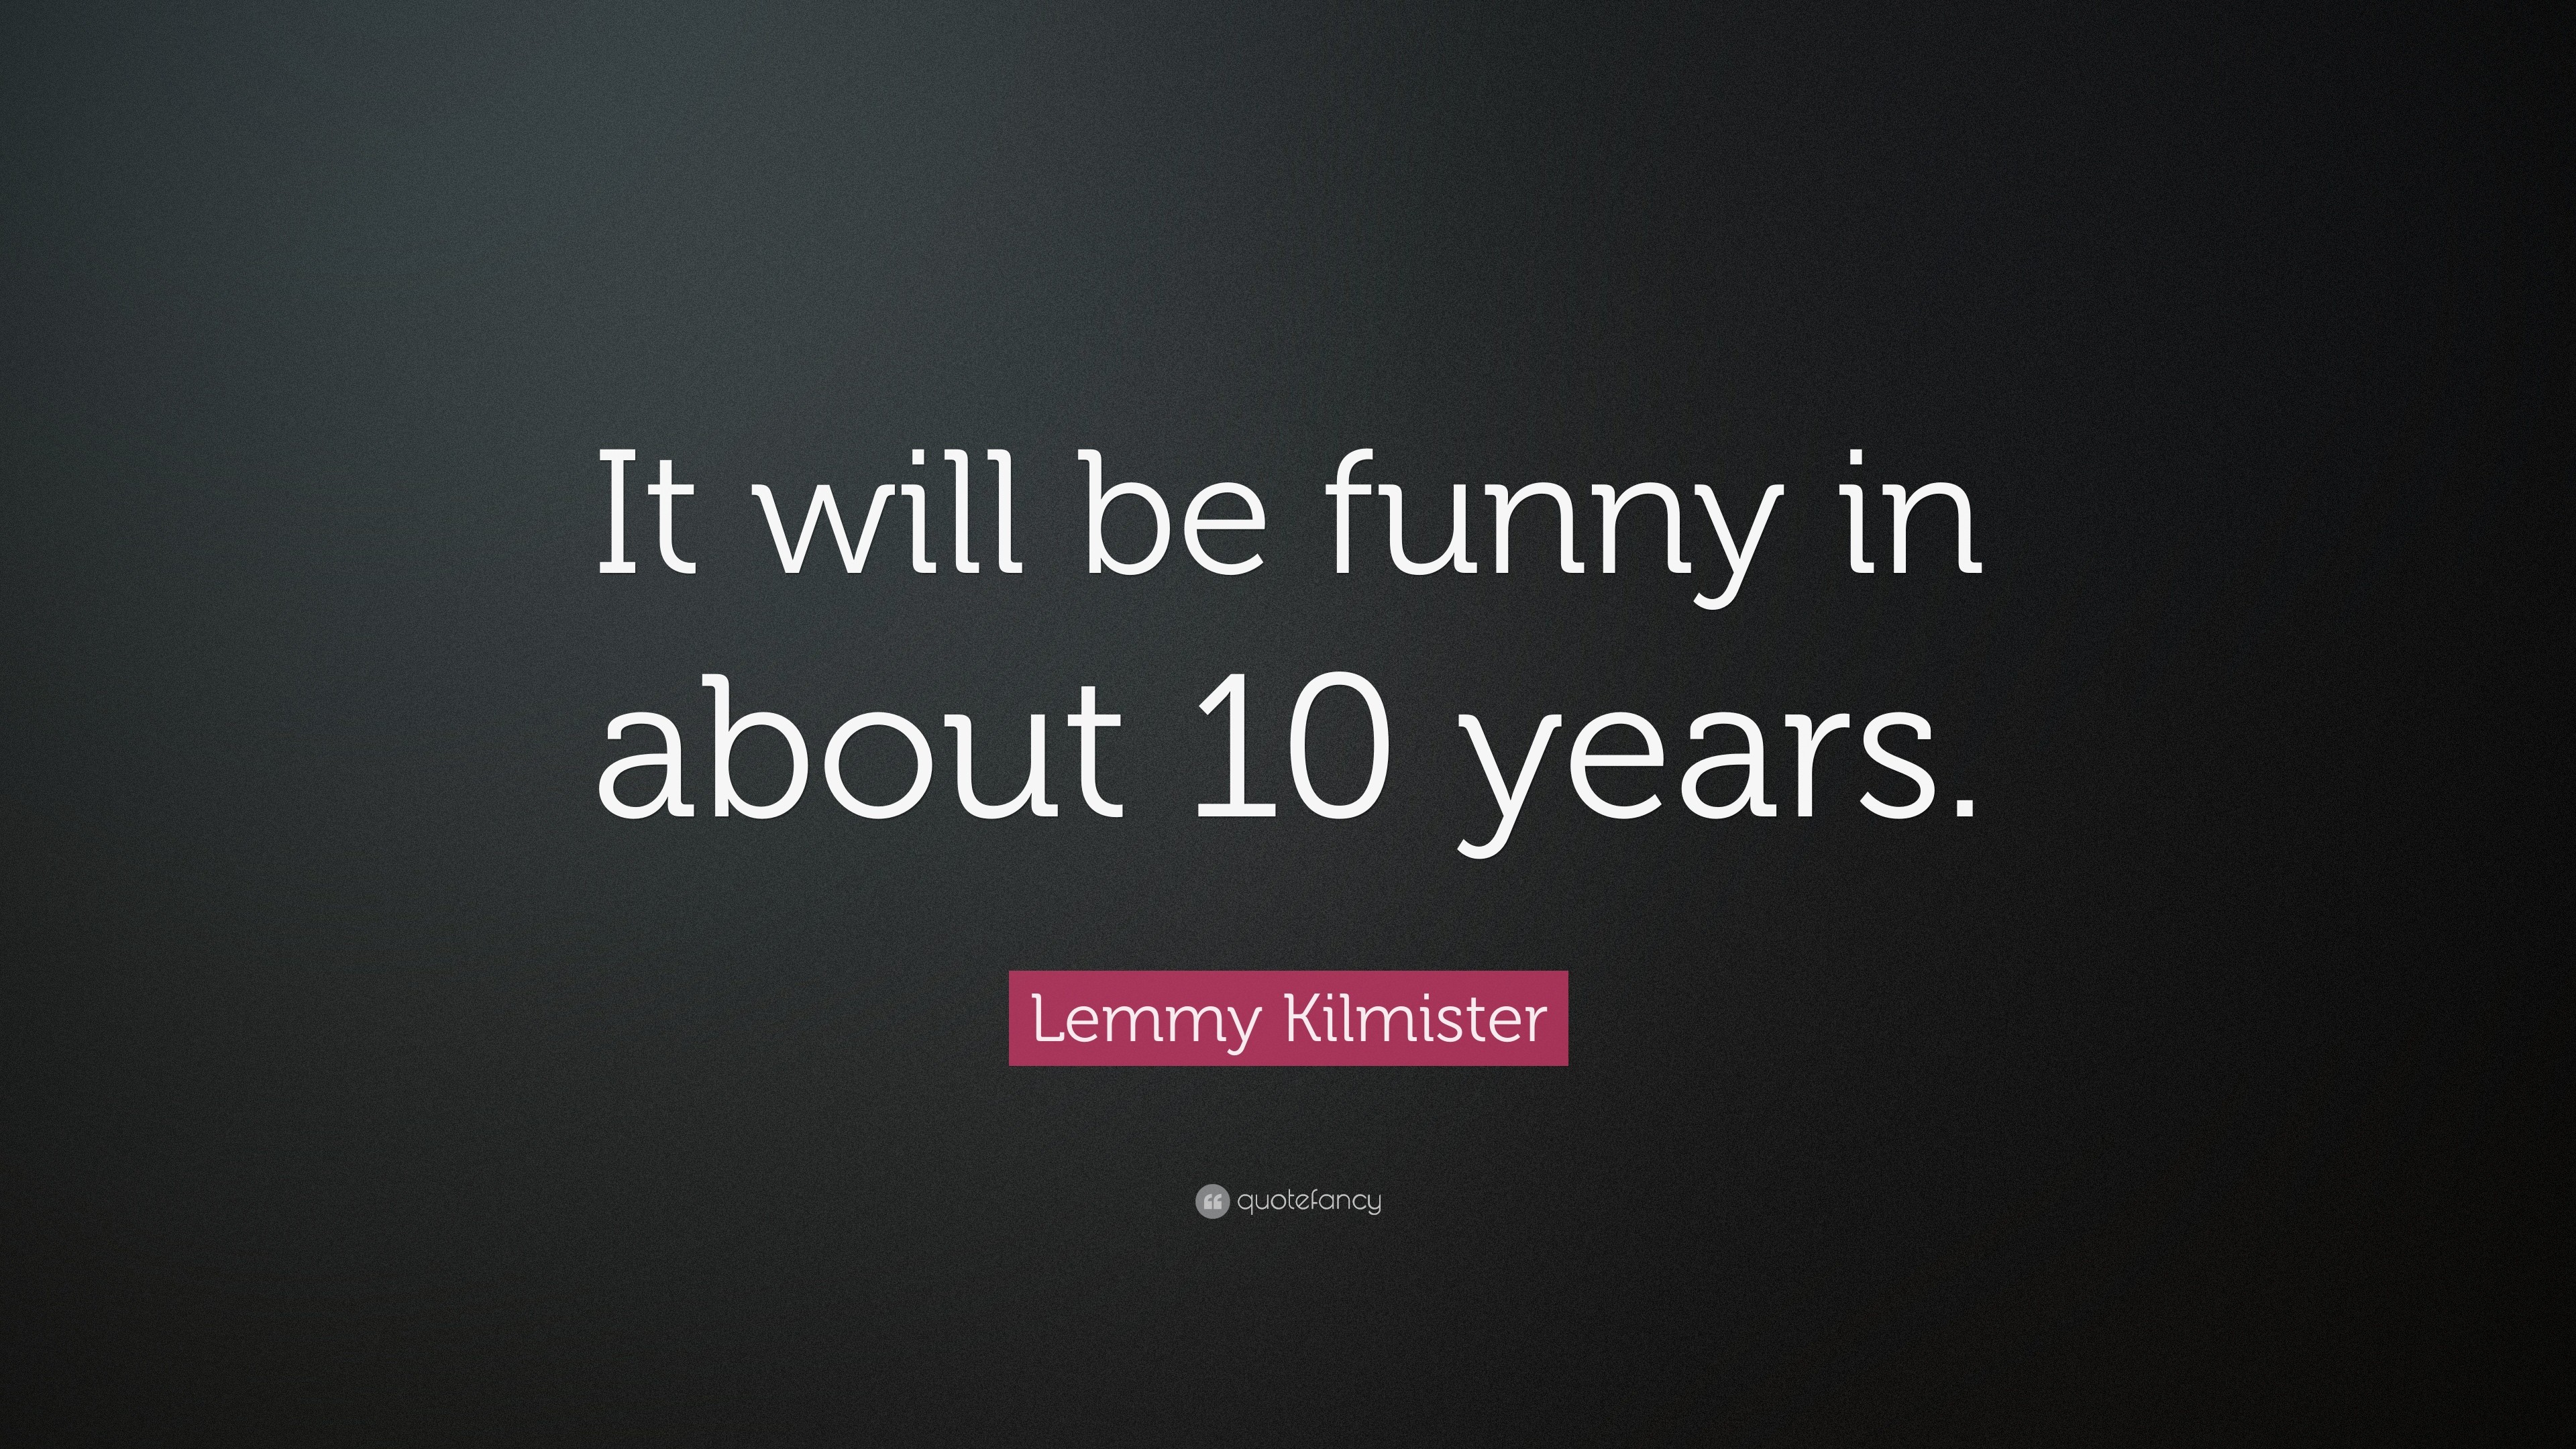 3840x2160 Lemmy Kilmister Quote: “It will be funny in about 10 years.”